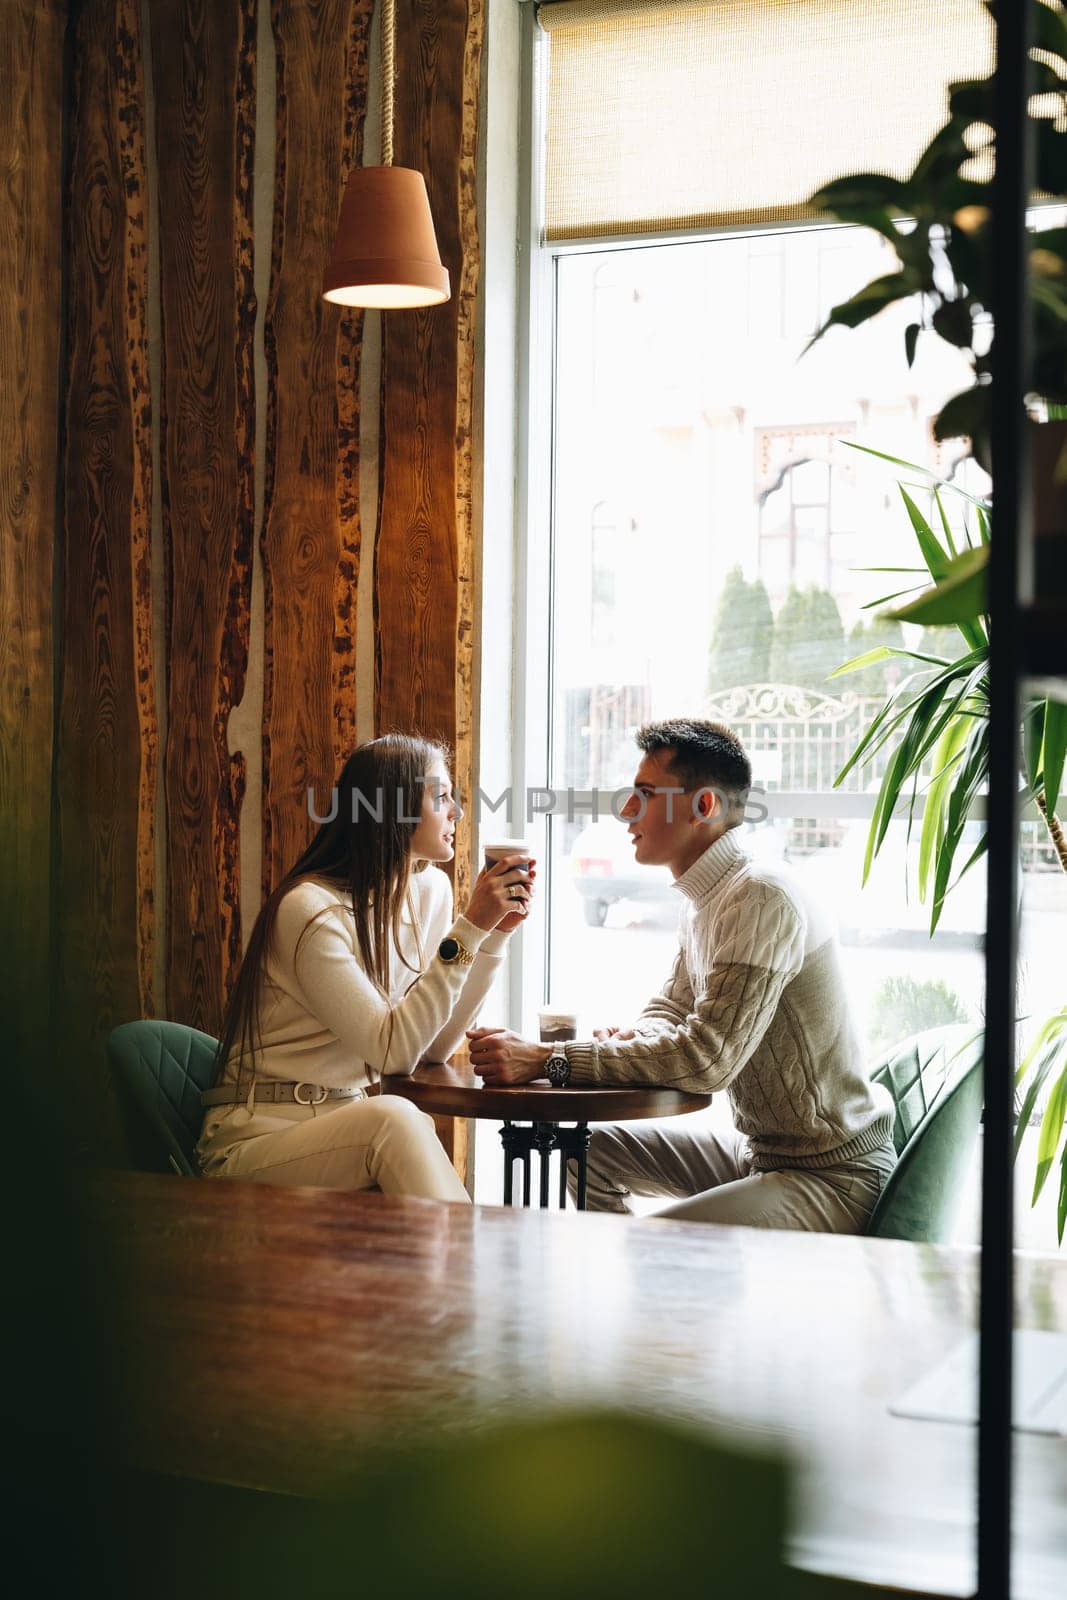 Two professionals are engaged in a conversation while sitting opposite each other at a wooden table in a cafe with natural light streaming in from a large window. They appear relaxed and focused, with cups of coffee in hand, surrounded by a warm, rustic interior.